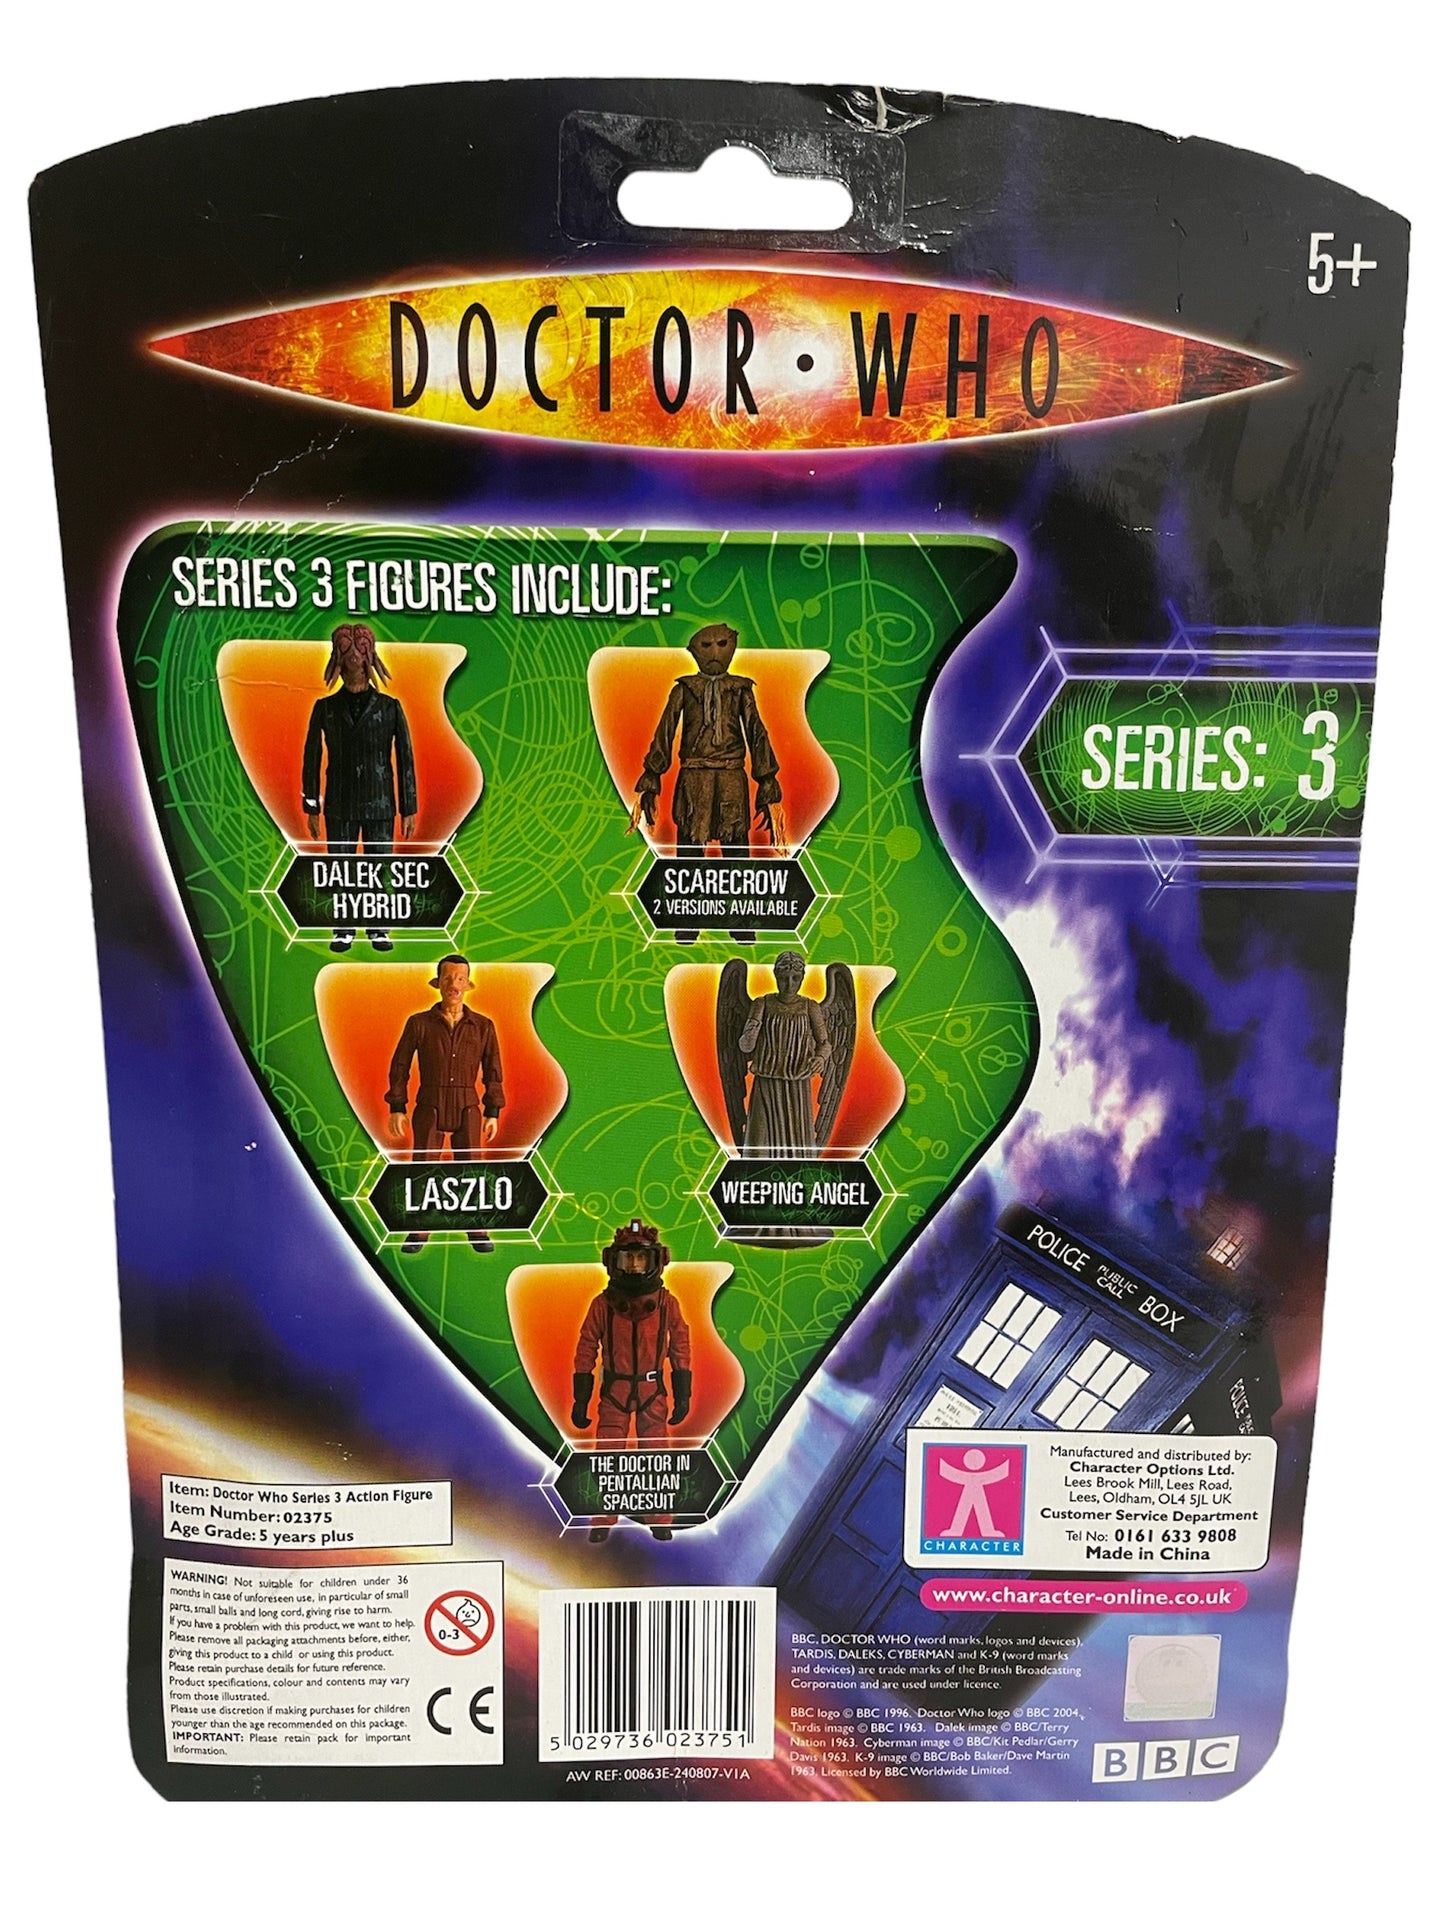 Vintage 2007 Doctor Who Series 3 The Master Highly Detailed Posable Action Figure - Brand New Factory Sealed Shop Stock Room Find